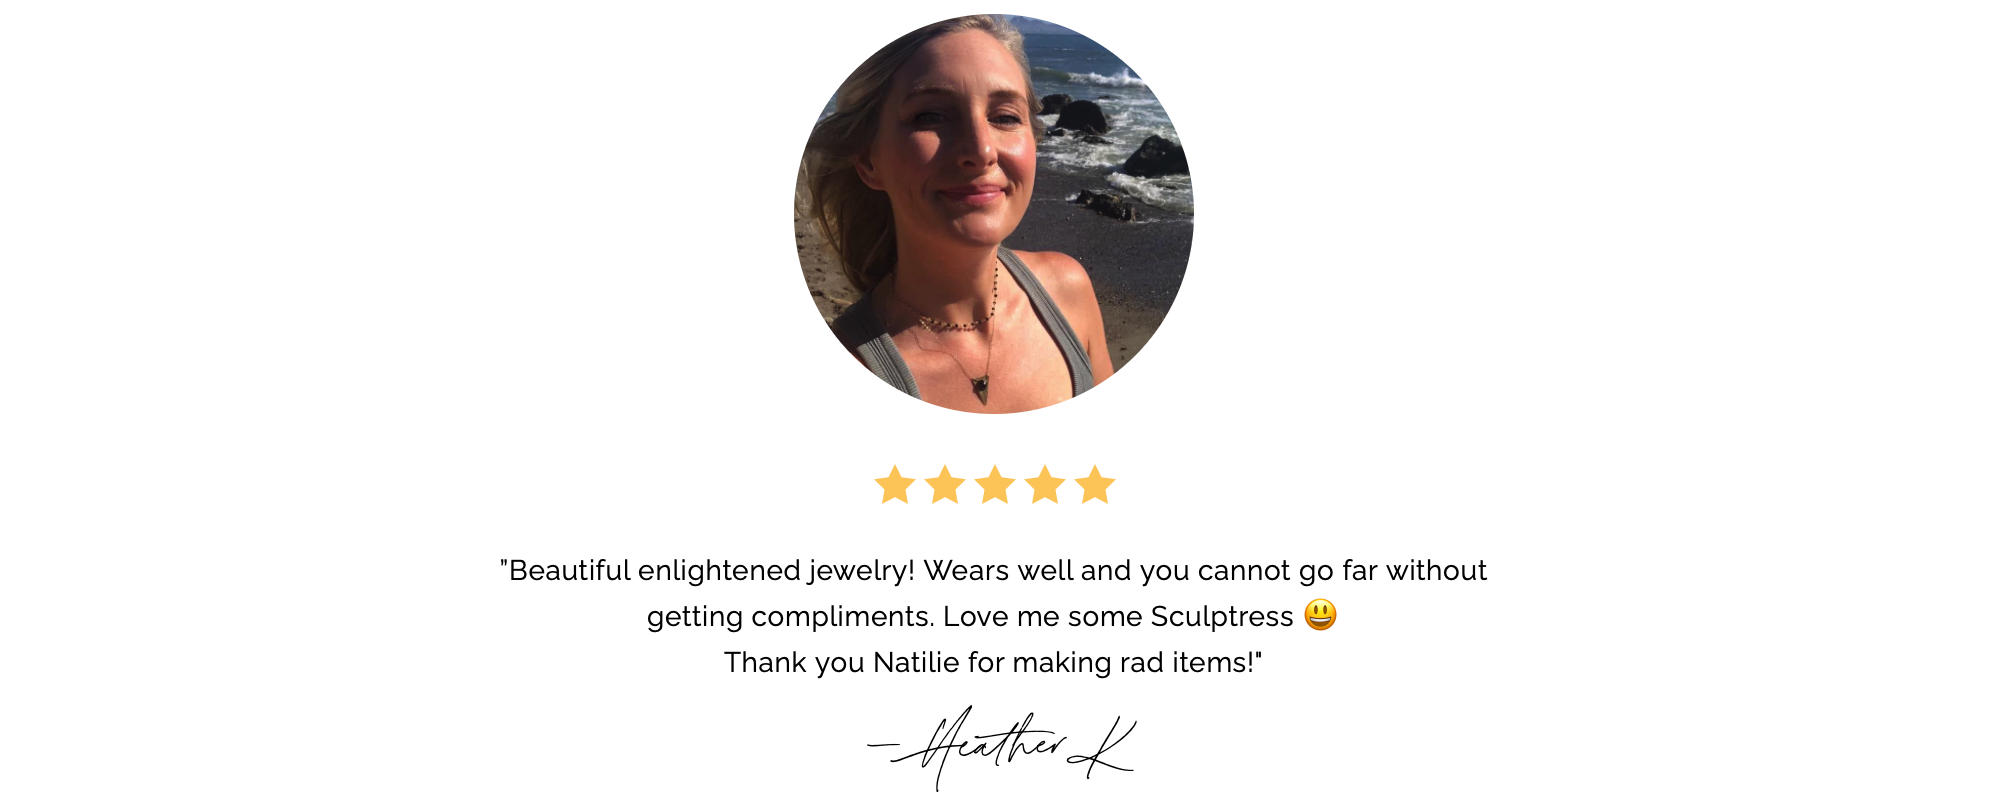 Sculptress Jewelry Big Sur California Designer Artist Review - Waterproof, sweat proof and hypoallergenic - ritual adornments for the everyday Goddess